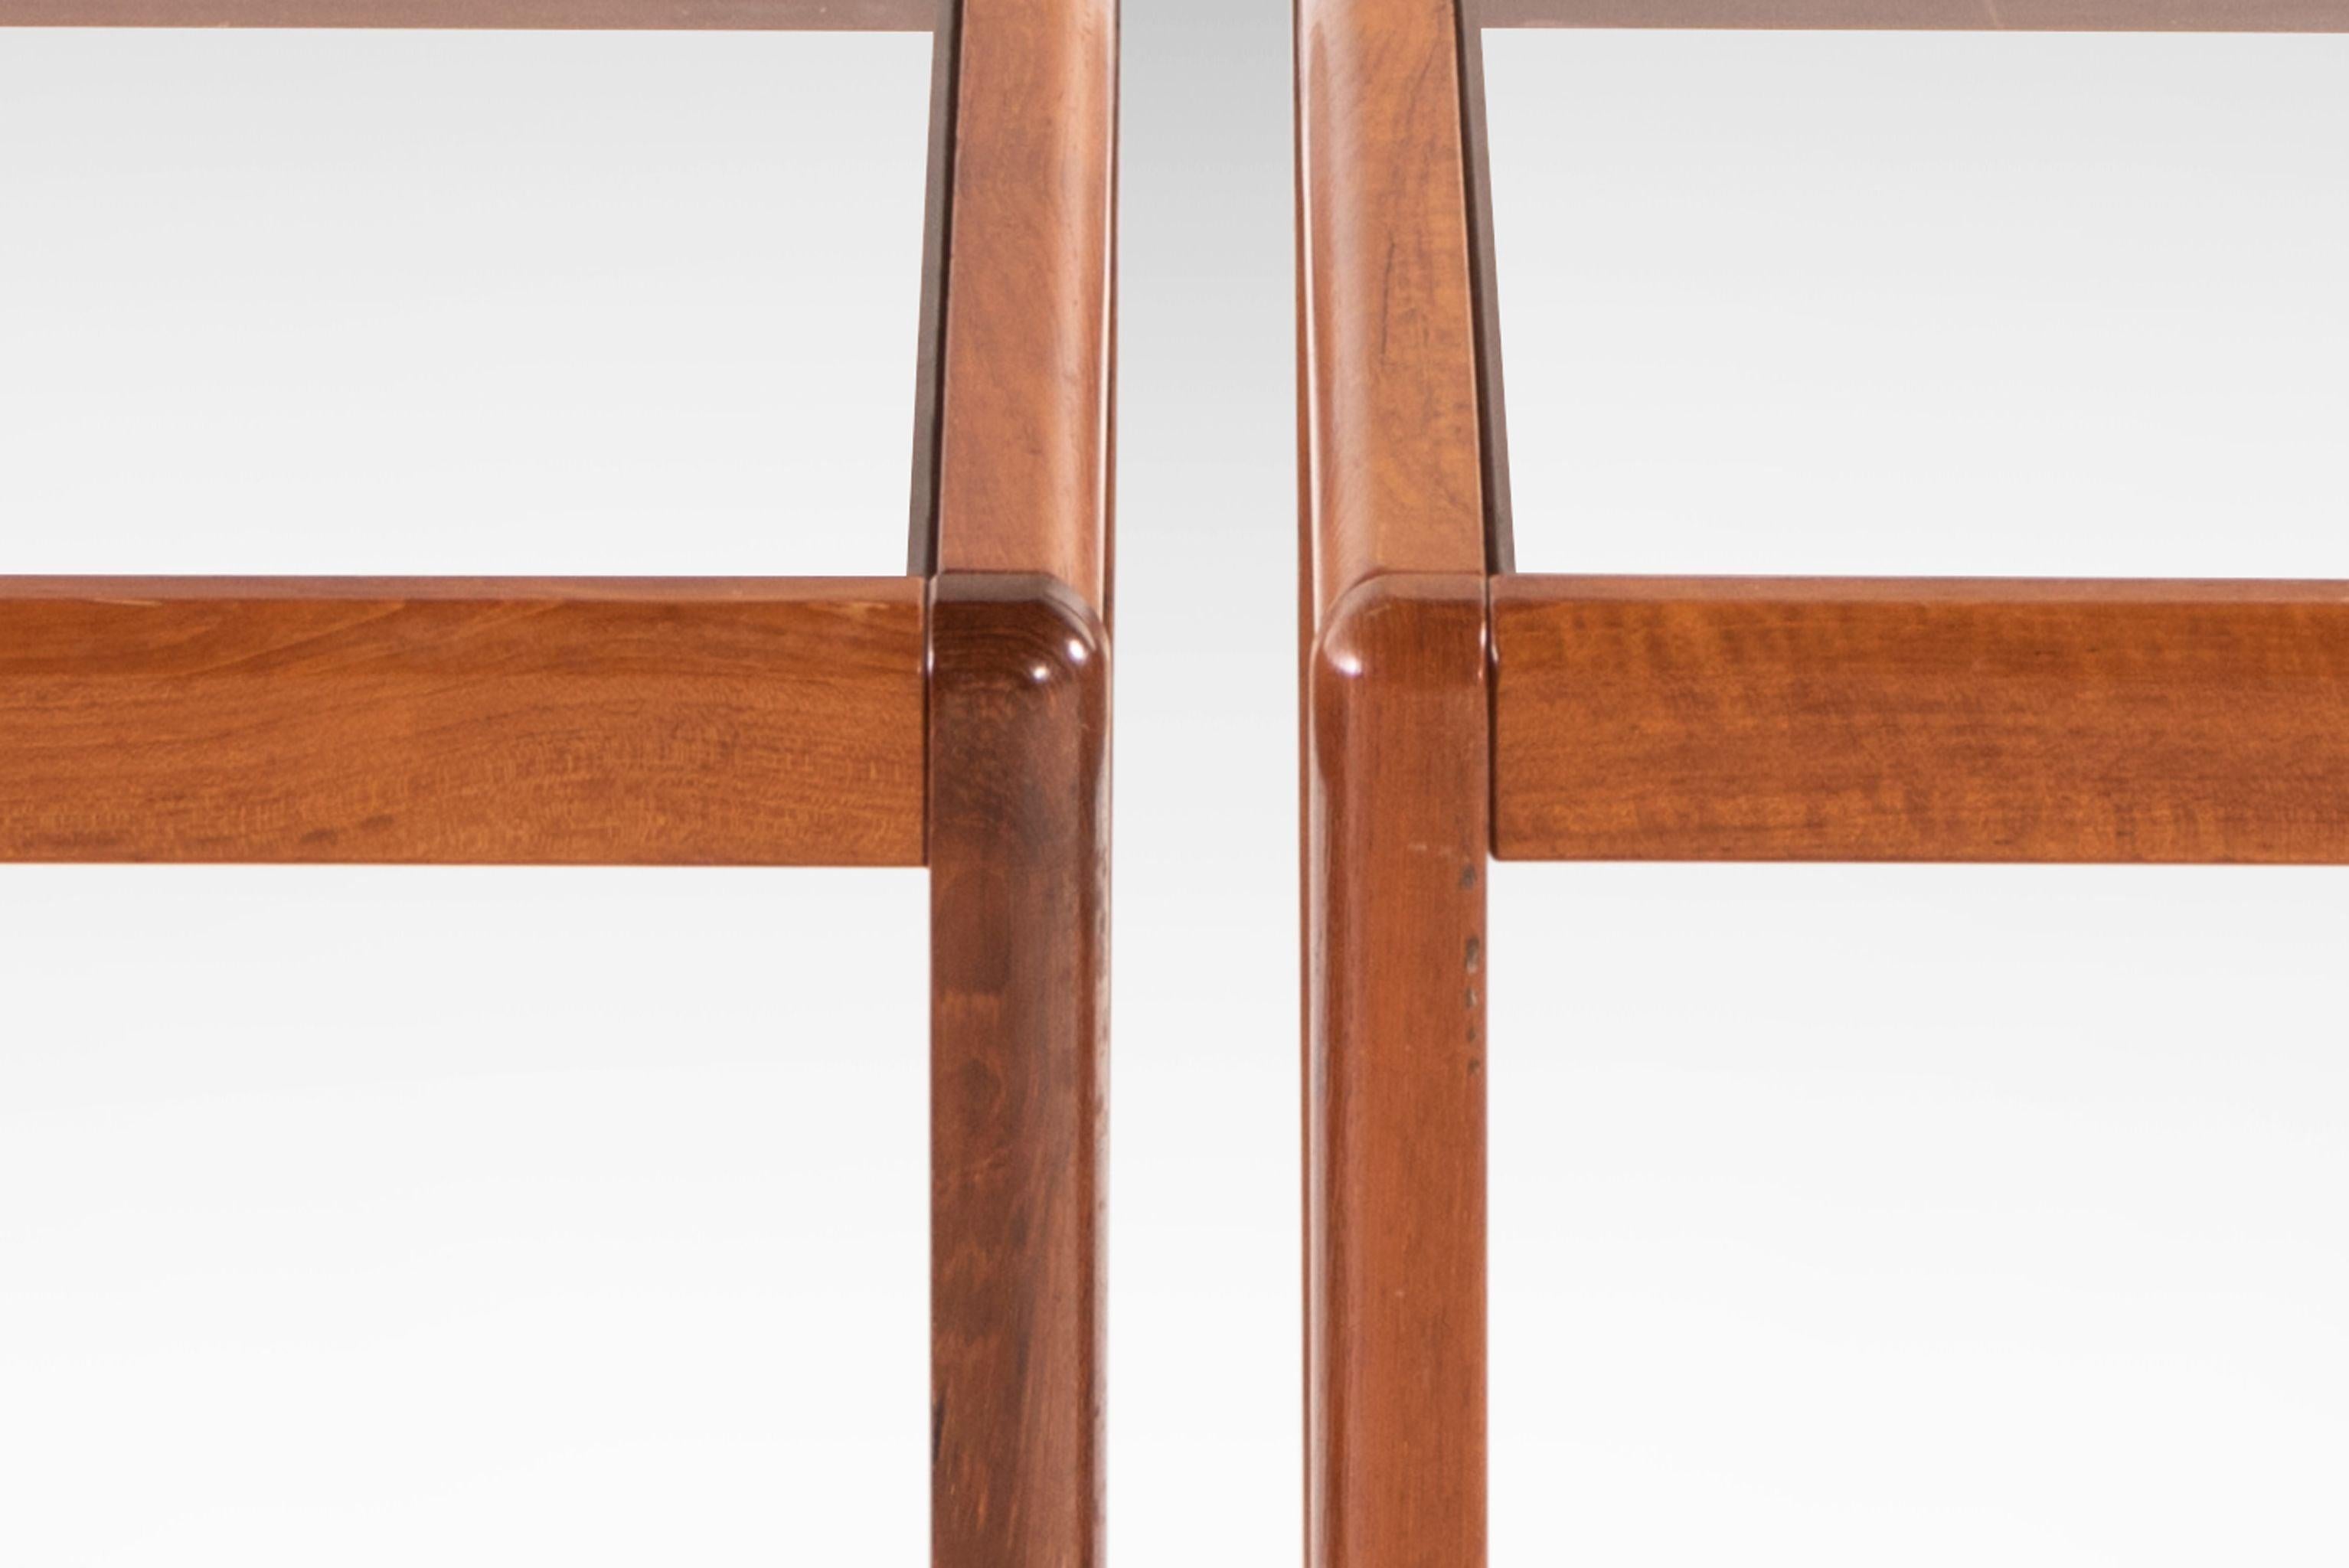 Minimalist Danish Modern Teak End Tables with Smoked Glass Tops, c. 1970's 7